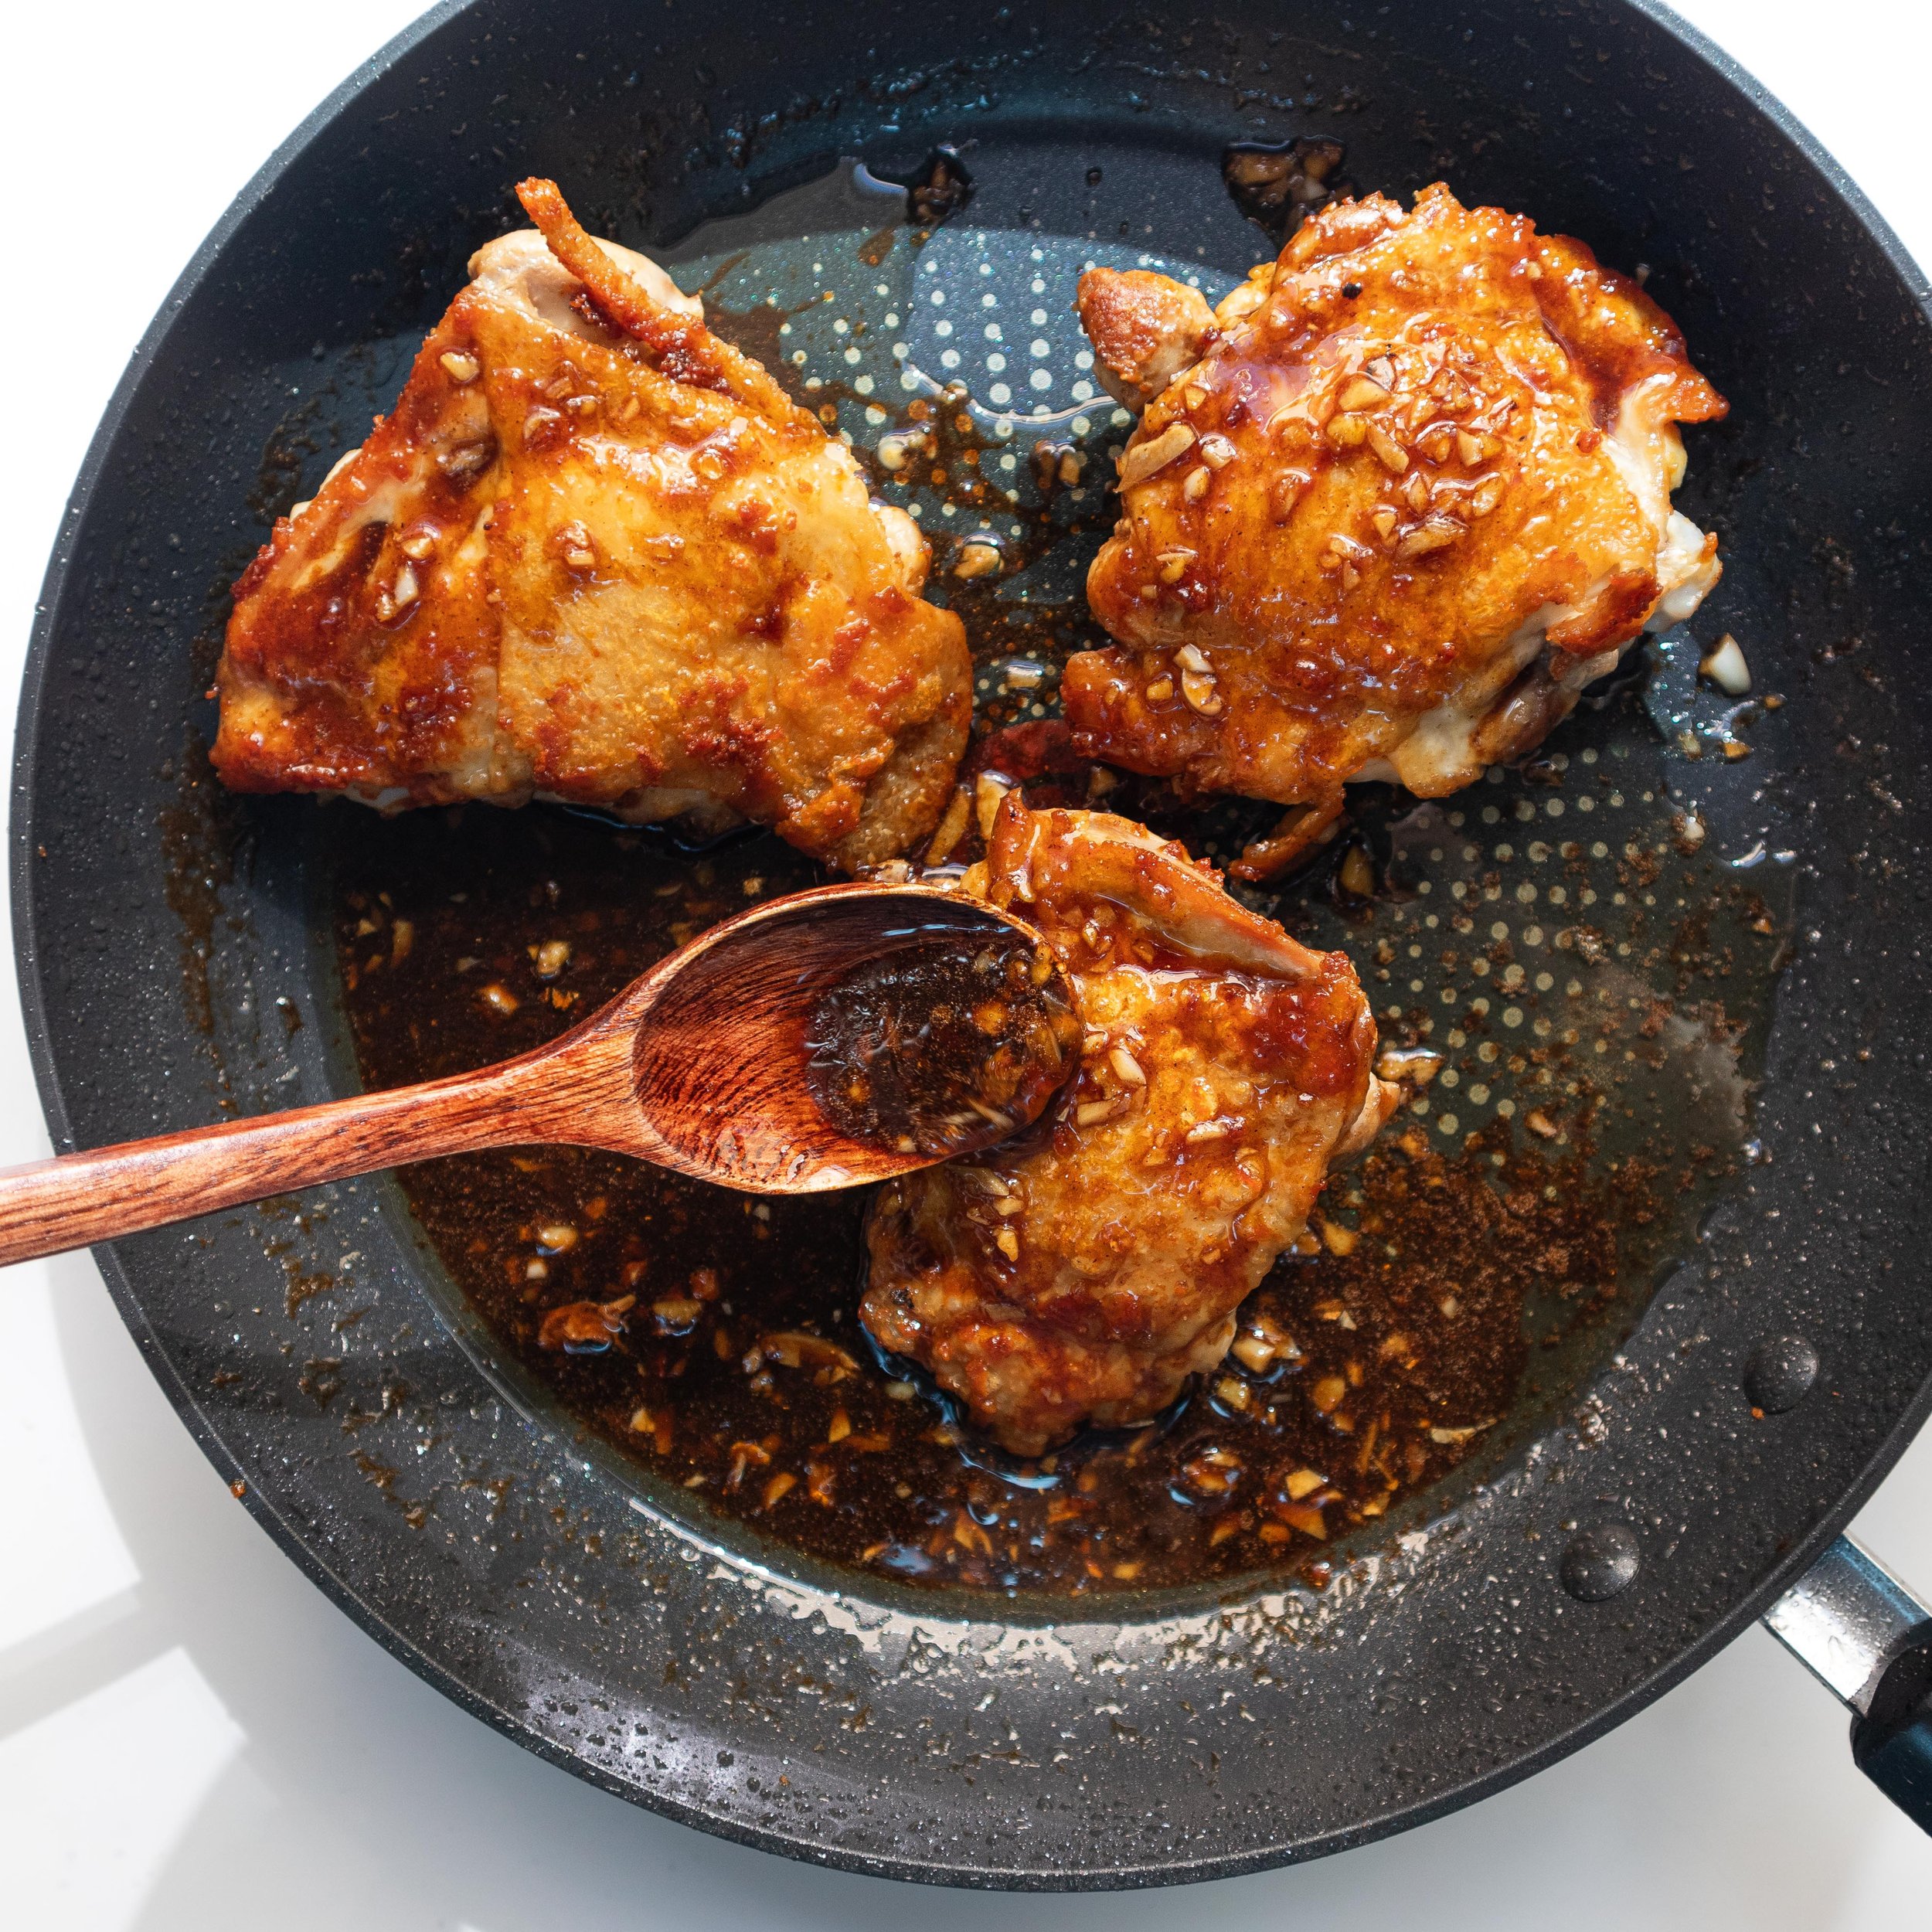 Coat chicken in the soy sauce glaze